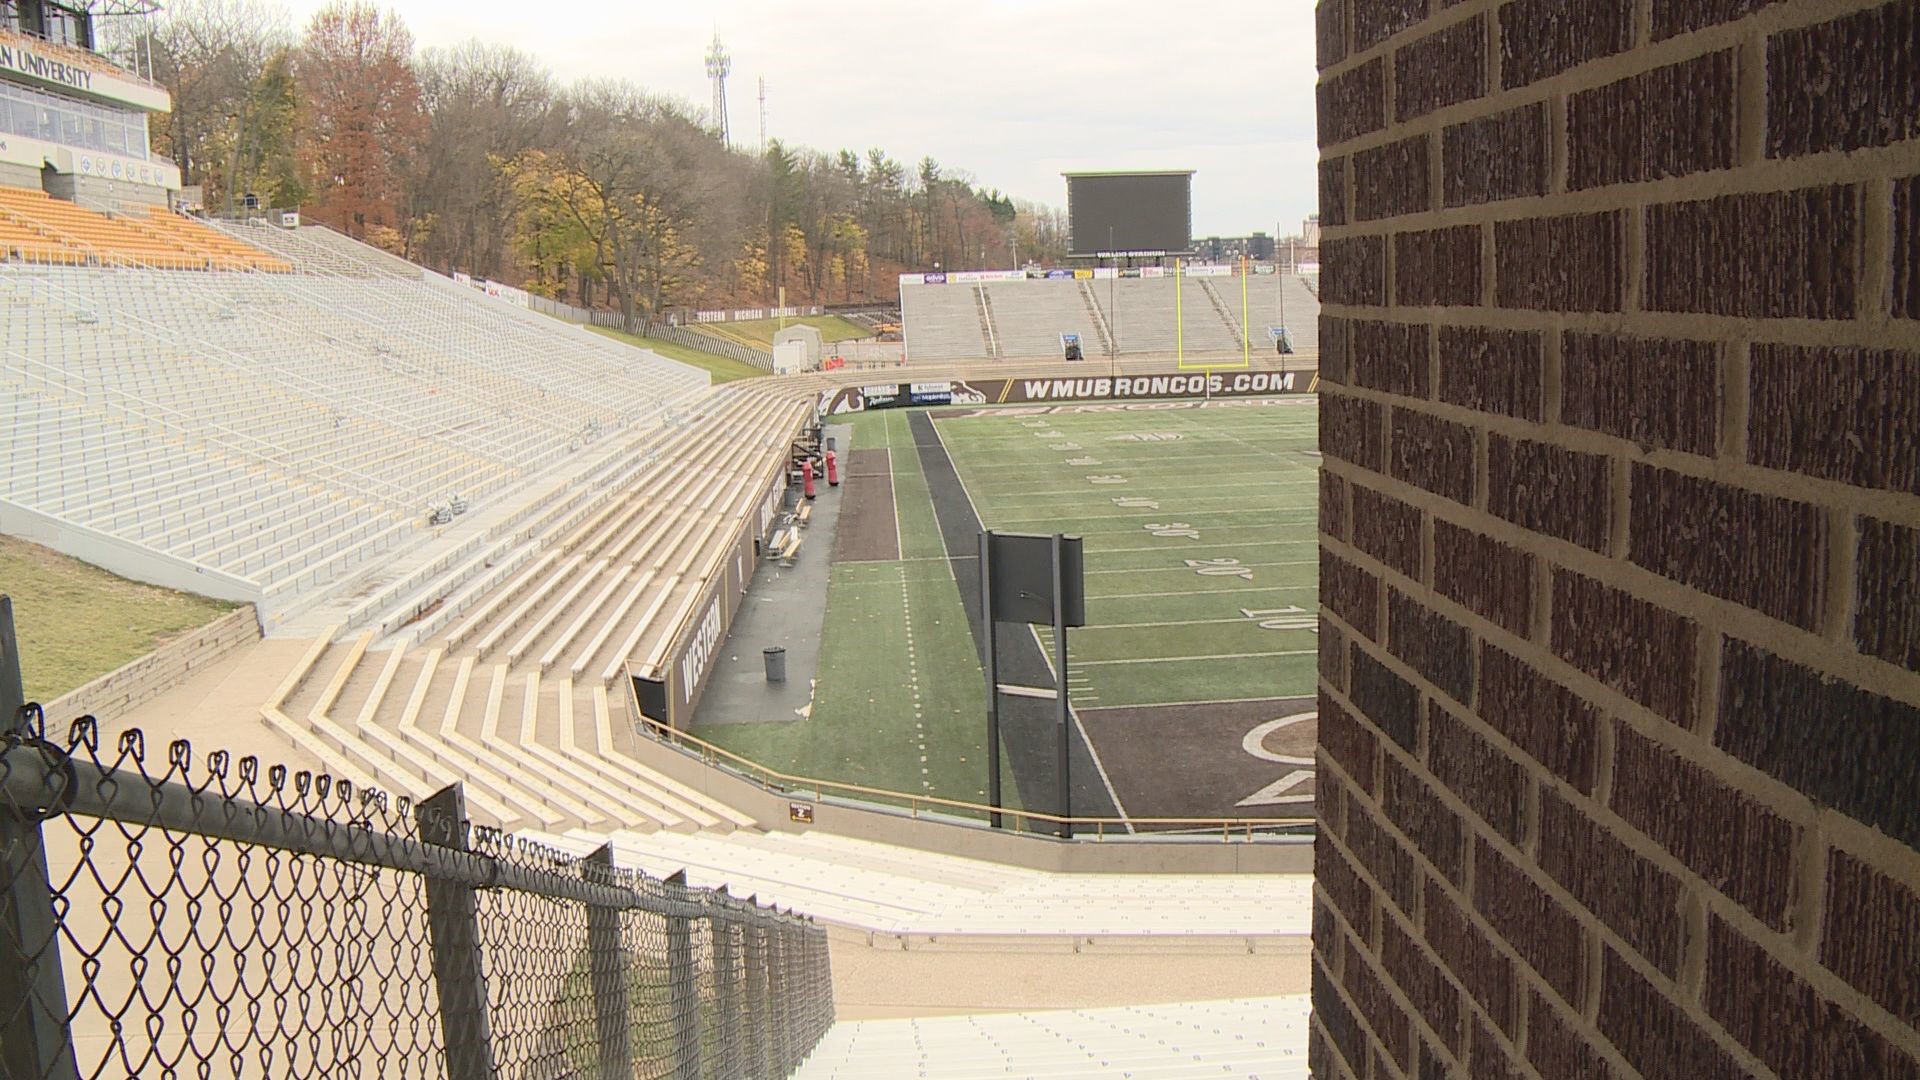 Waldo Stadium, the home of the Western Michigan Broncos, provides a great environment for college football fans.